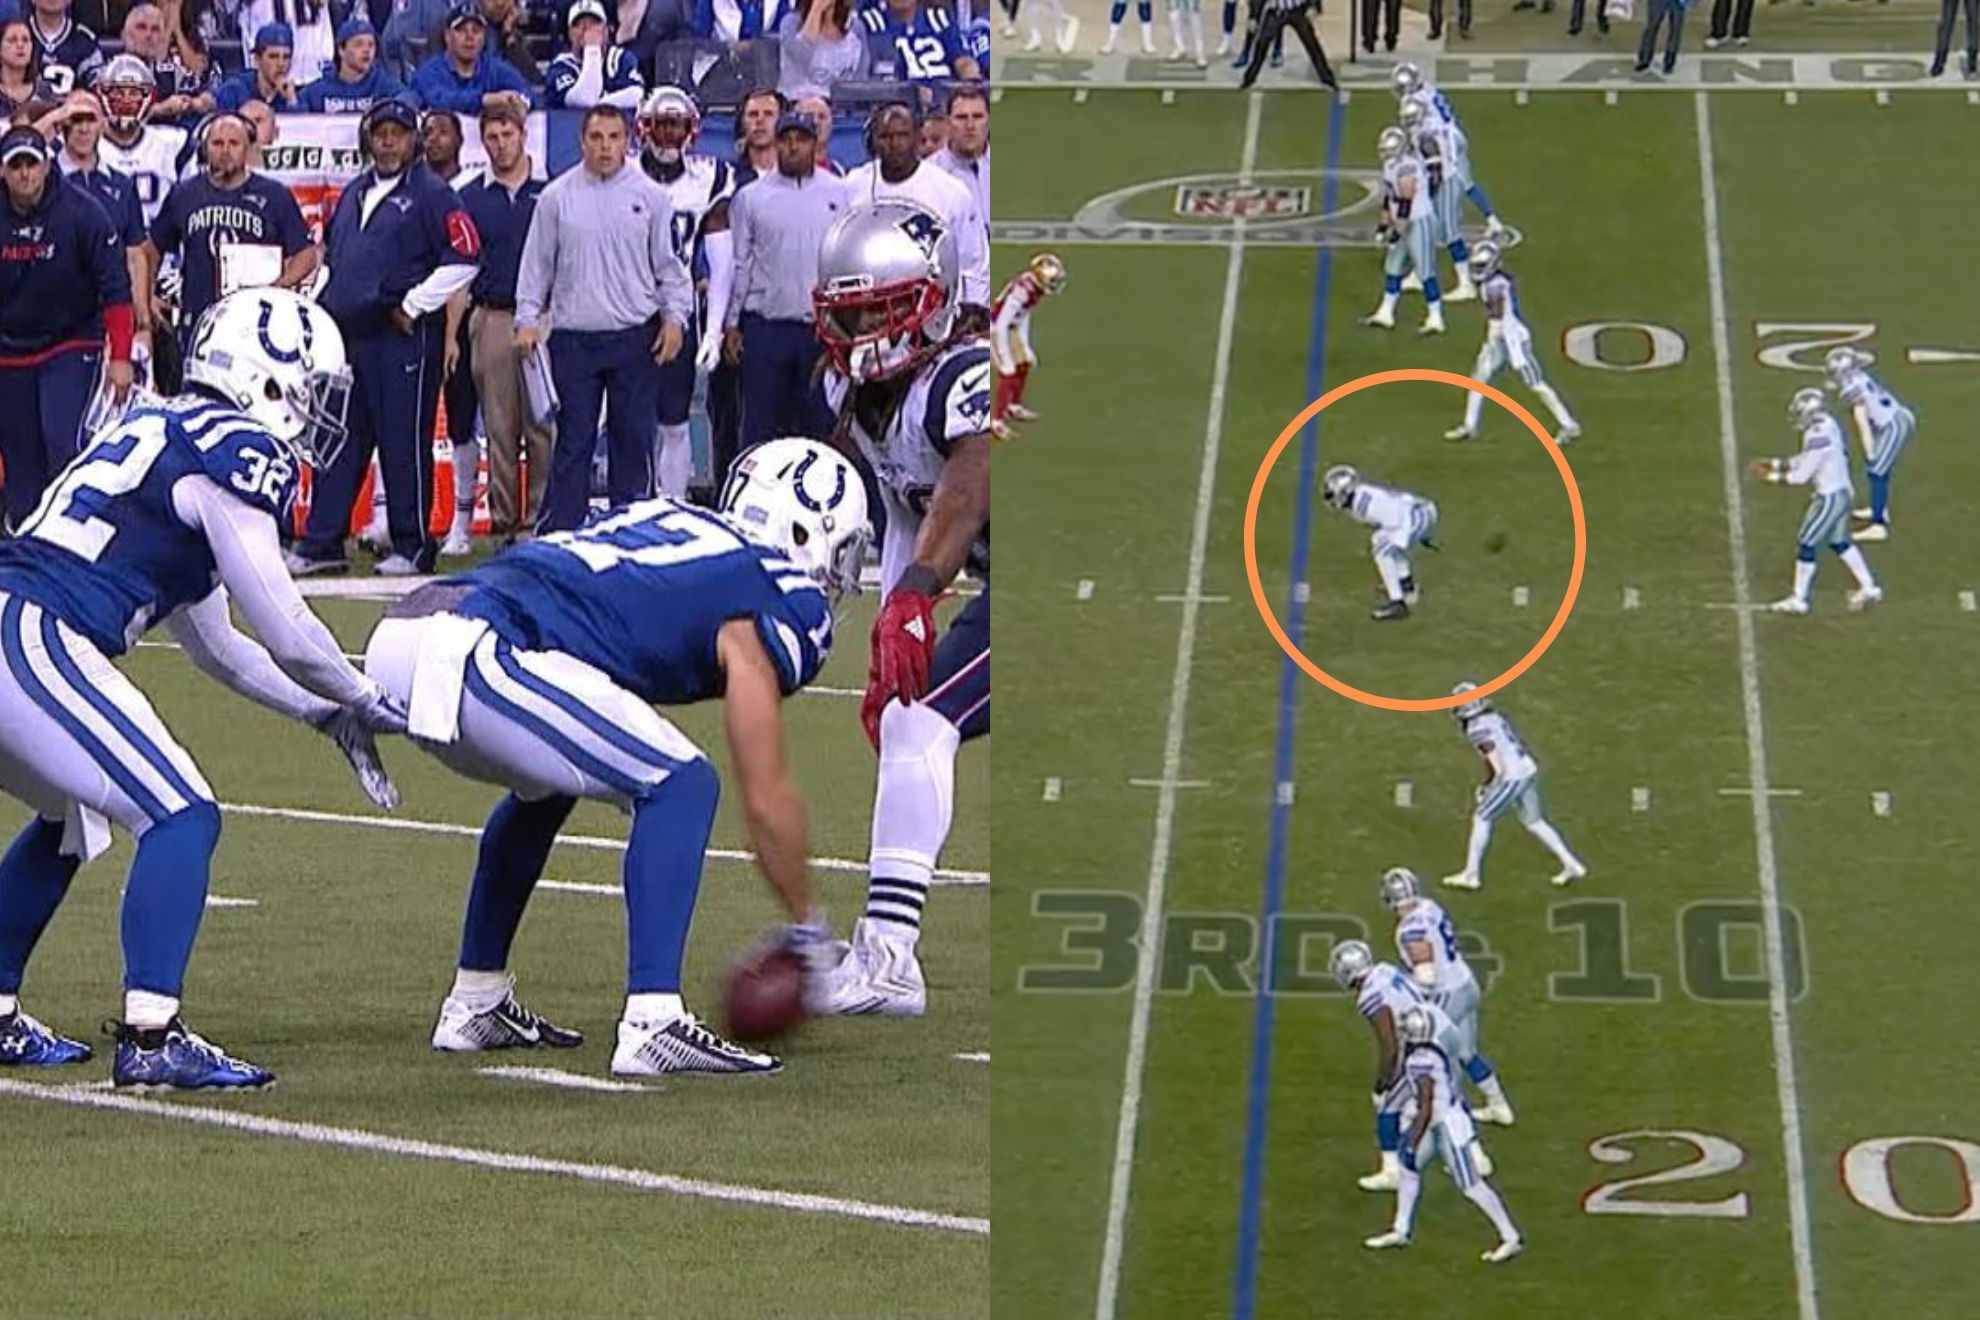 (Left) The play known as the 'Colts Catastrophe'. (Right) Zeke Elliott snaps the ball to Dak Prescott in the final play vs the 49ers.